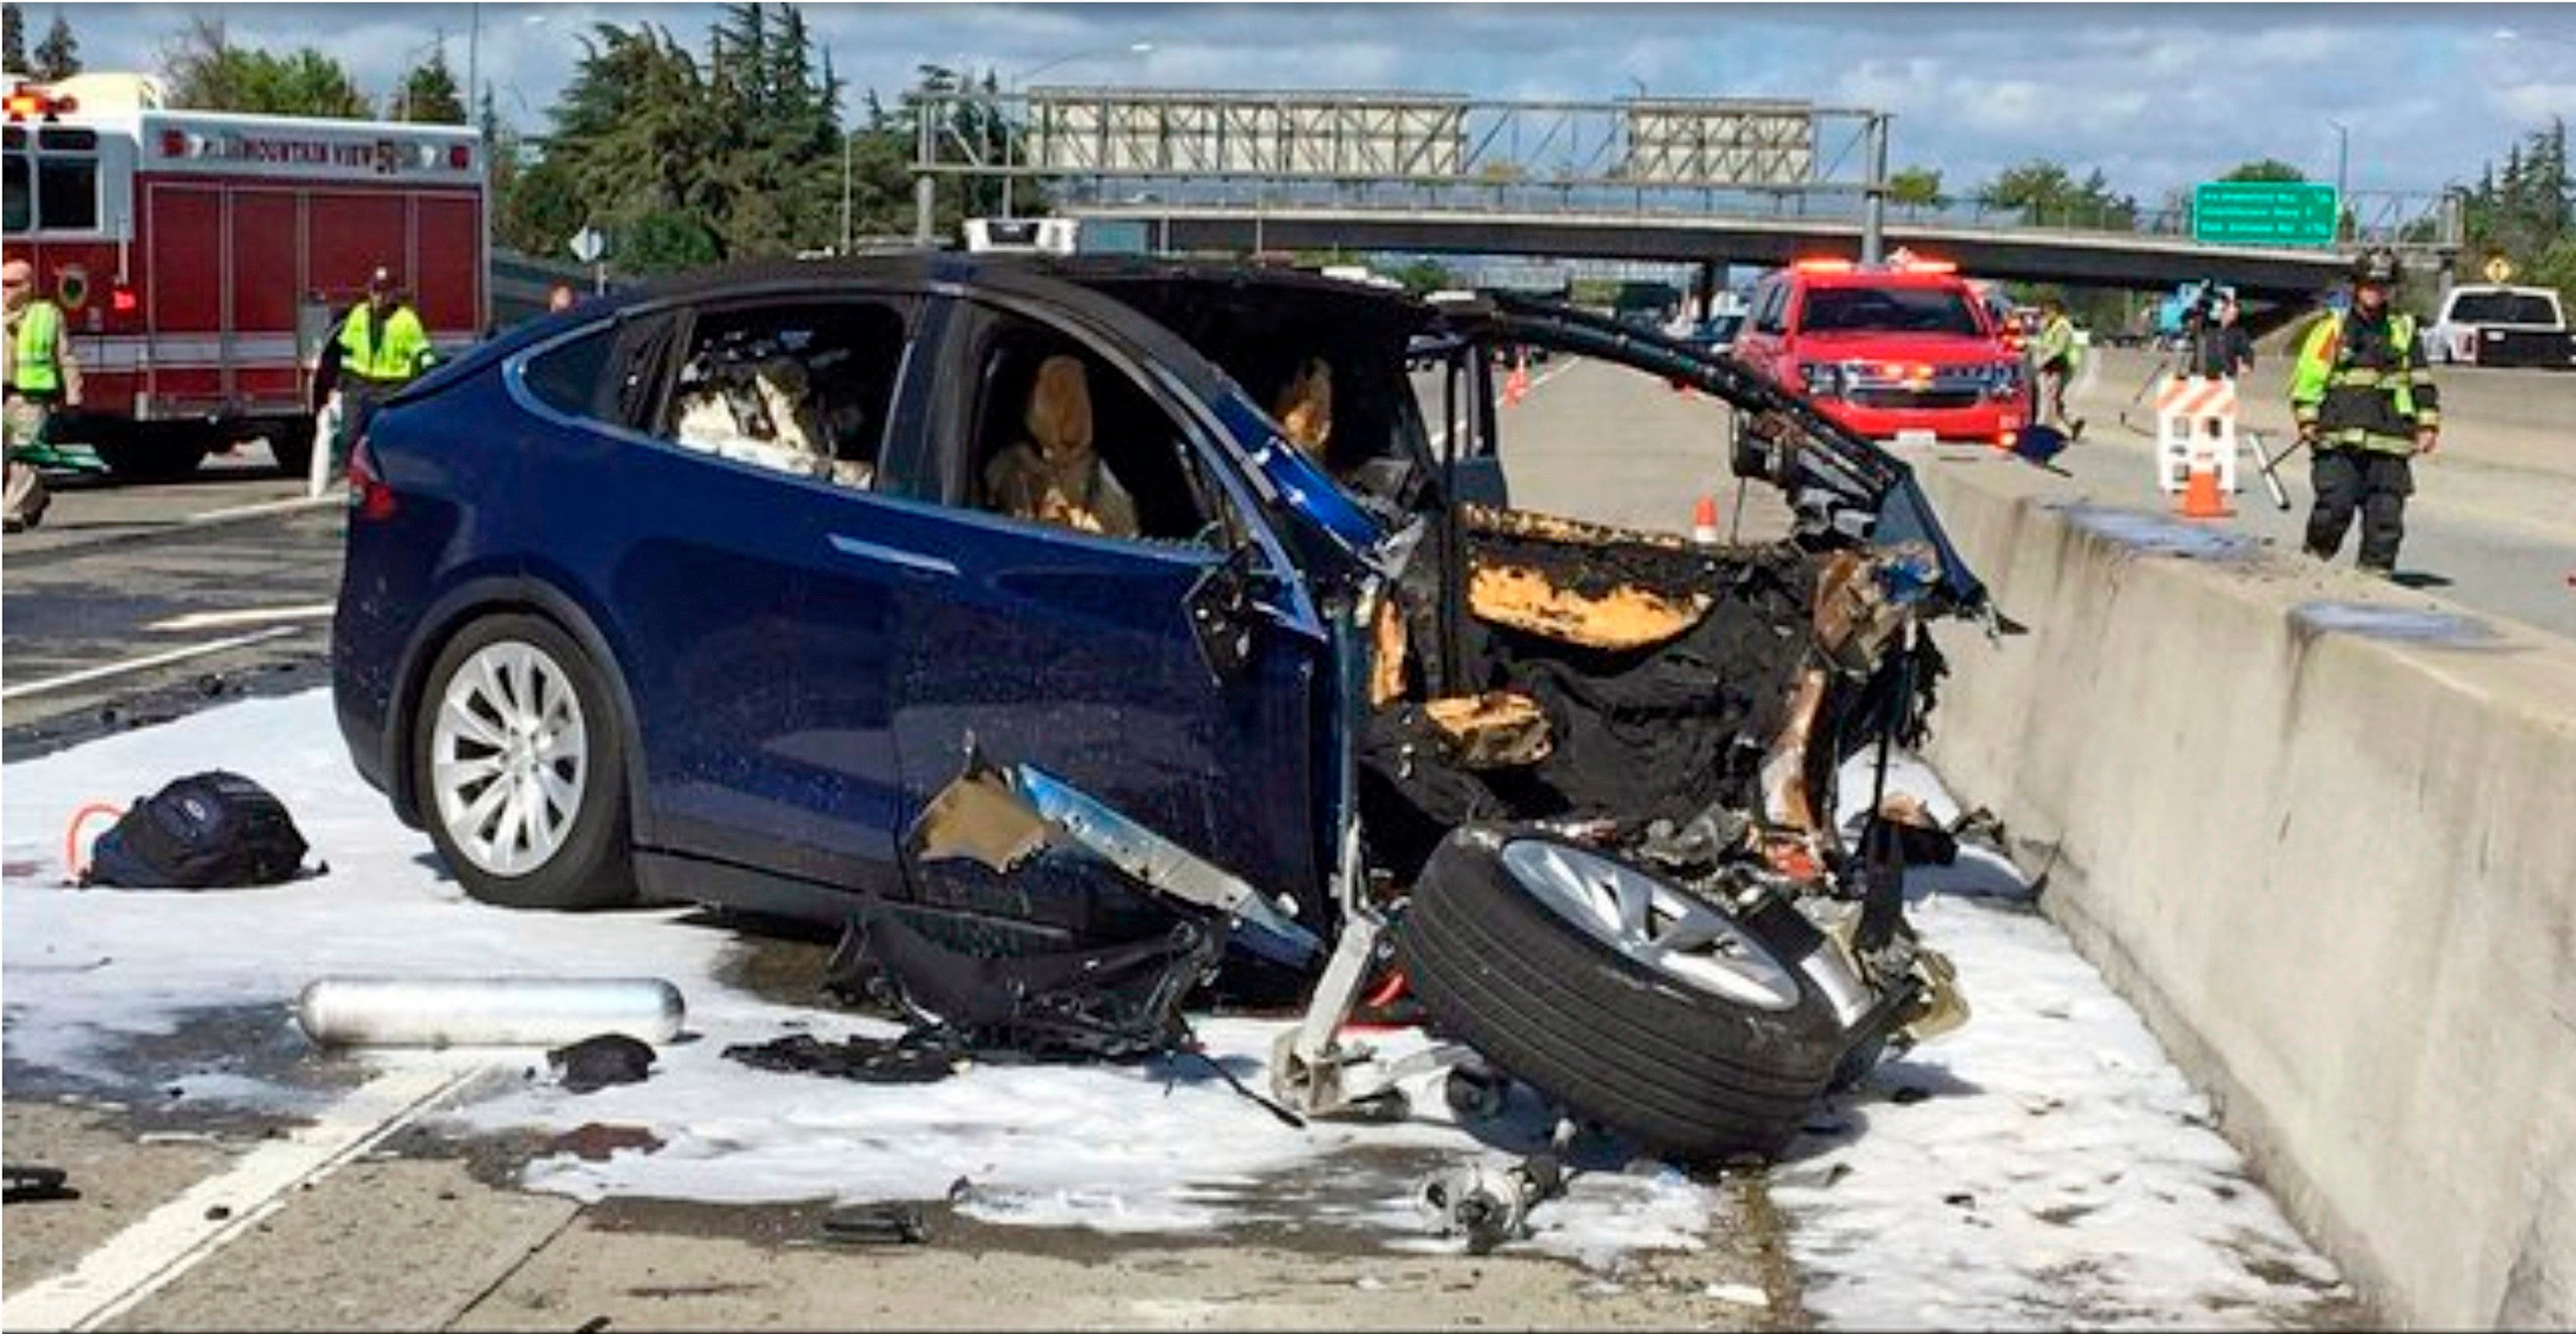 Emergency personnel work at the scene where a Tesla car crashed into a highway barrier in California’s Mountain View in 2018. Photo: KTVU-TV via AP